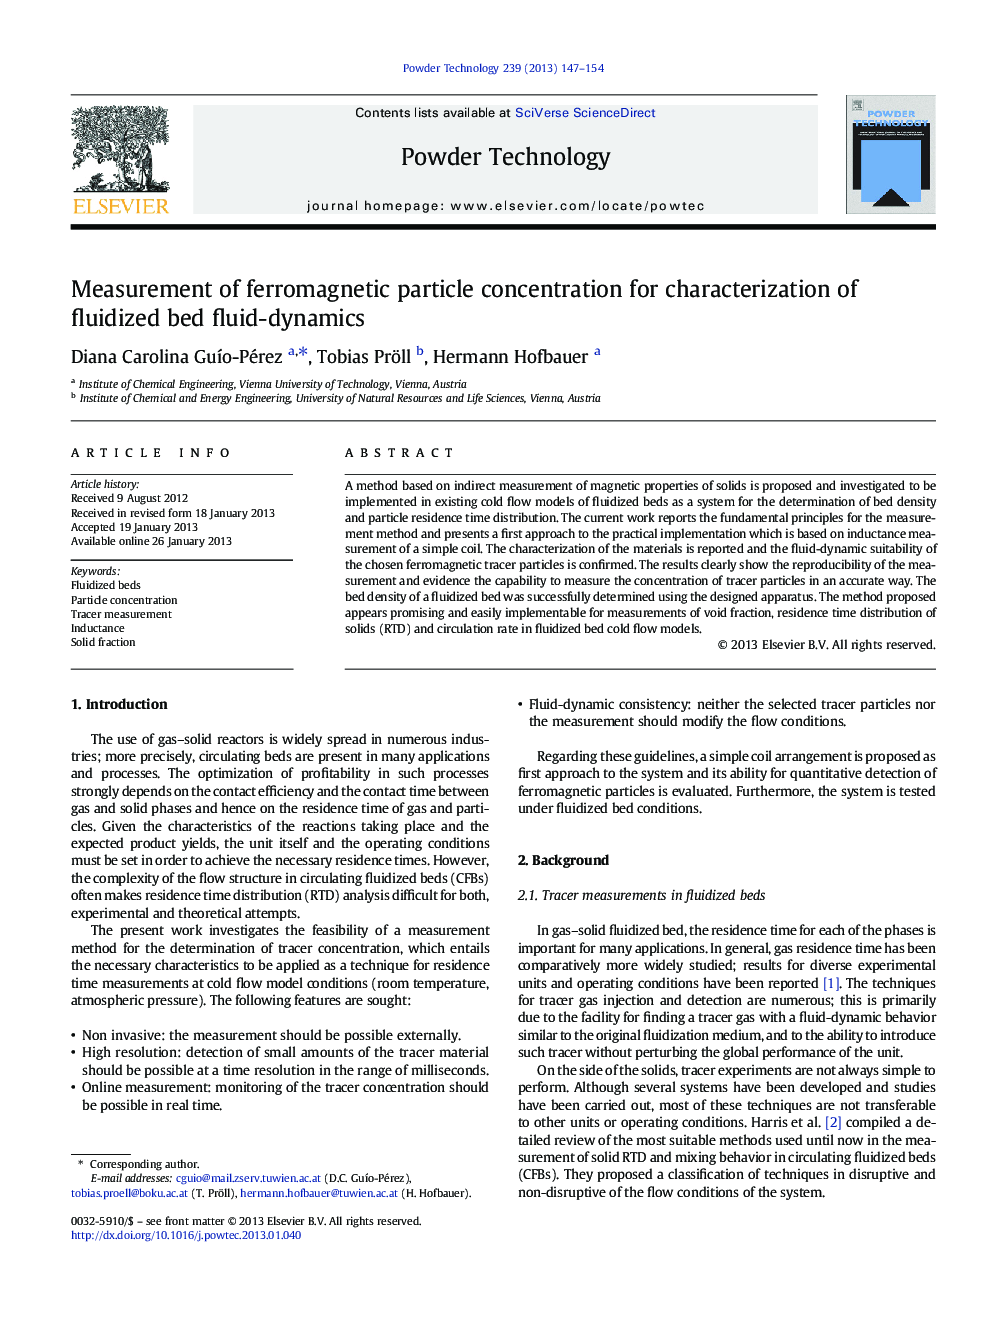 Measurement of ferromagnetic particle concentration for characterization of fluidized bed fluid-dynamics